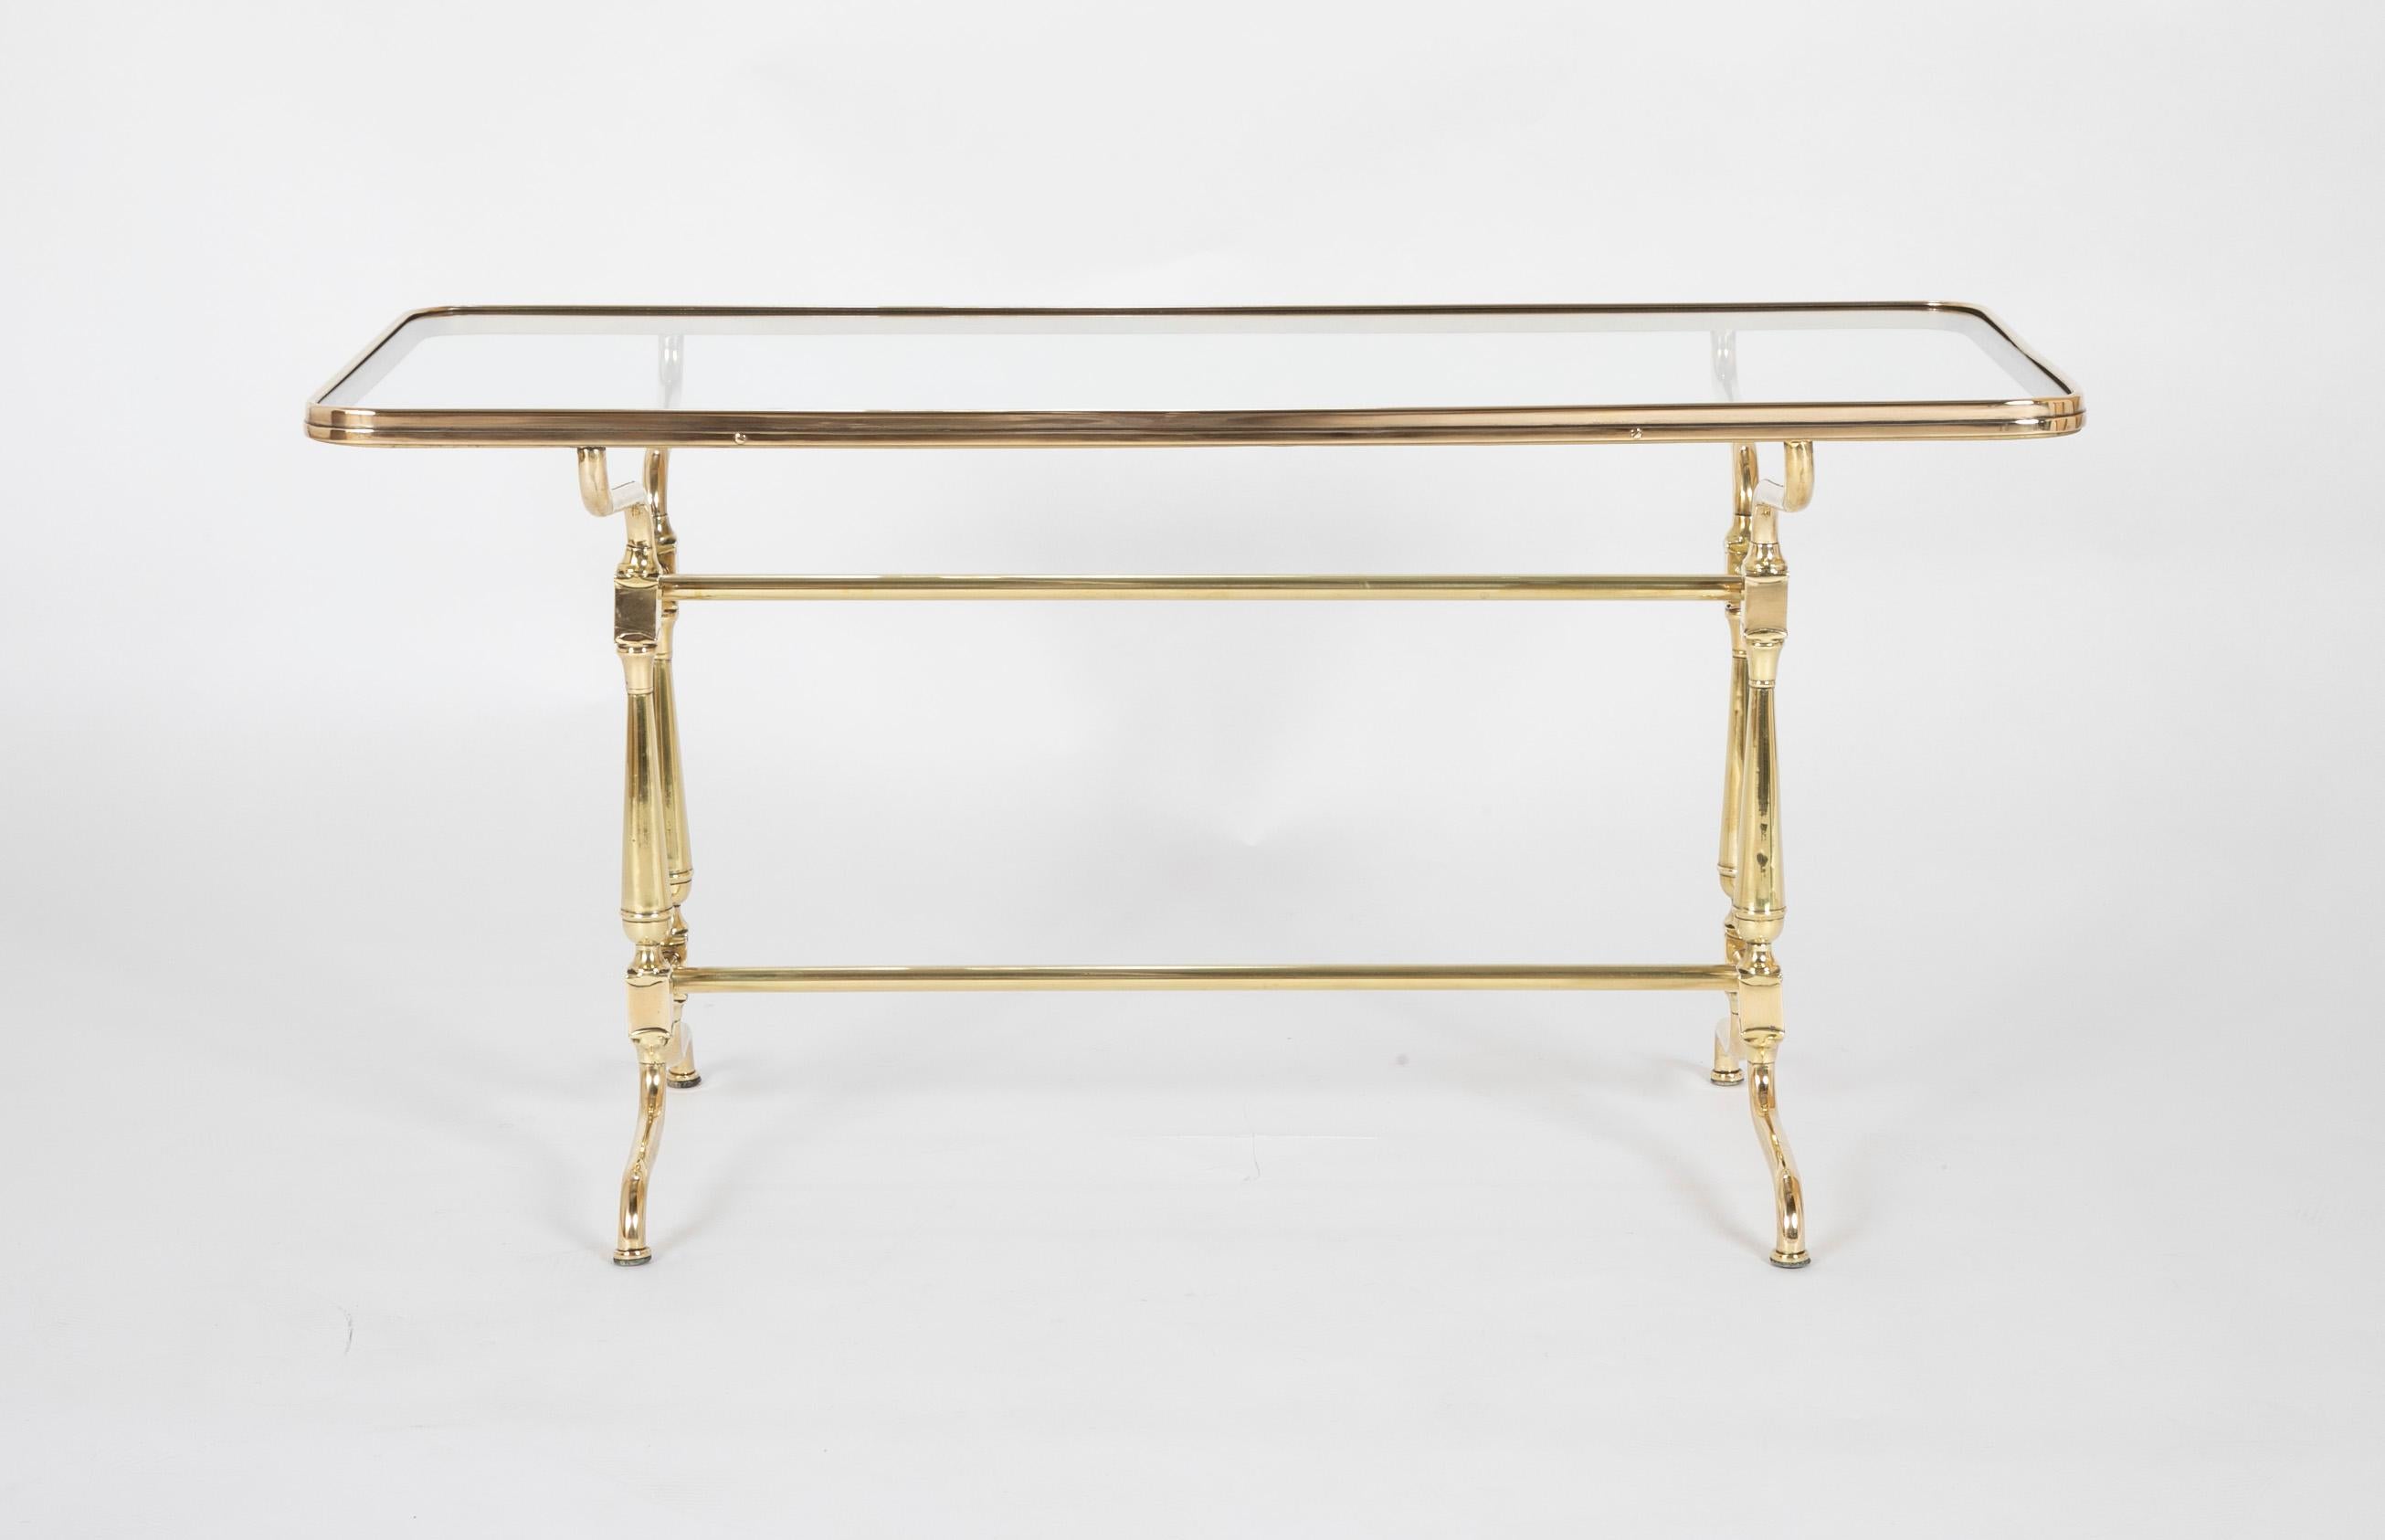 Other Early 20th Century French Glass Top Brass Coffee Table For Sale